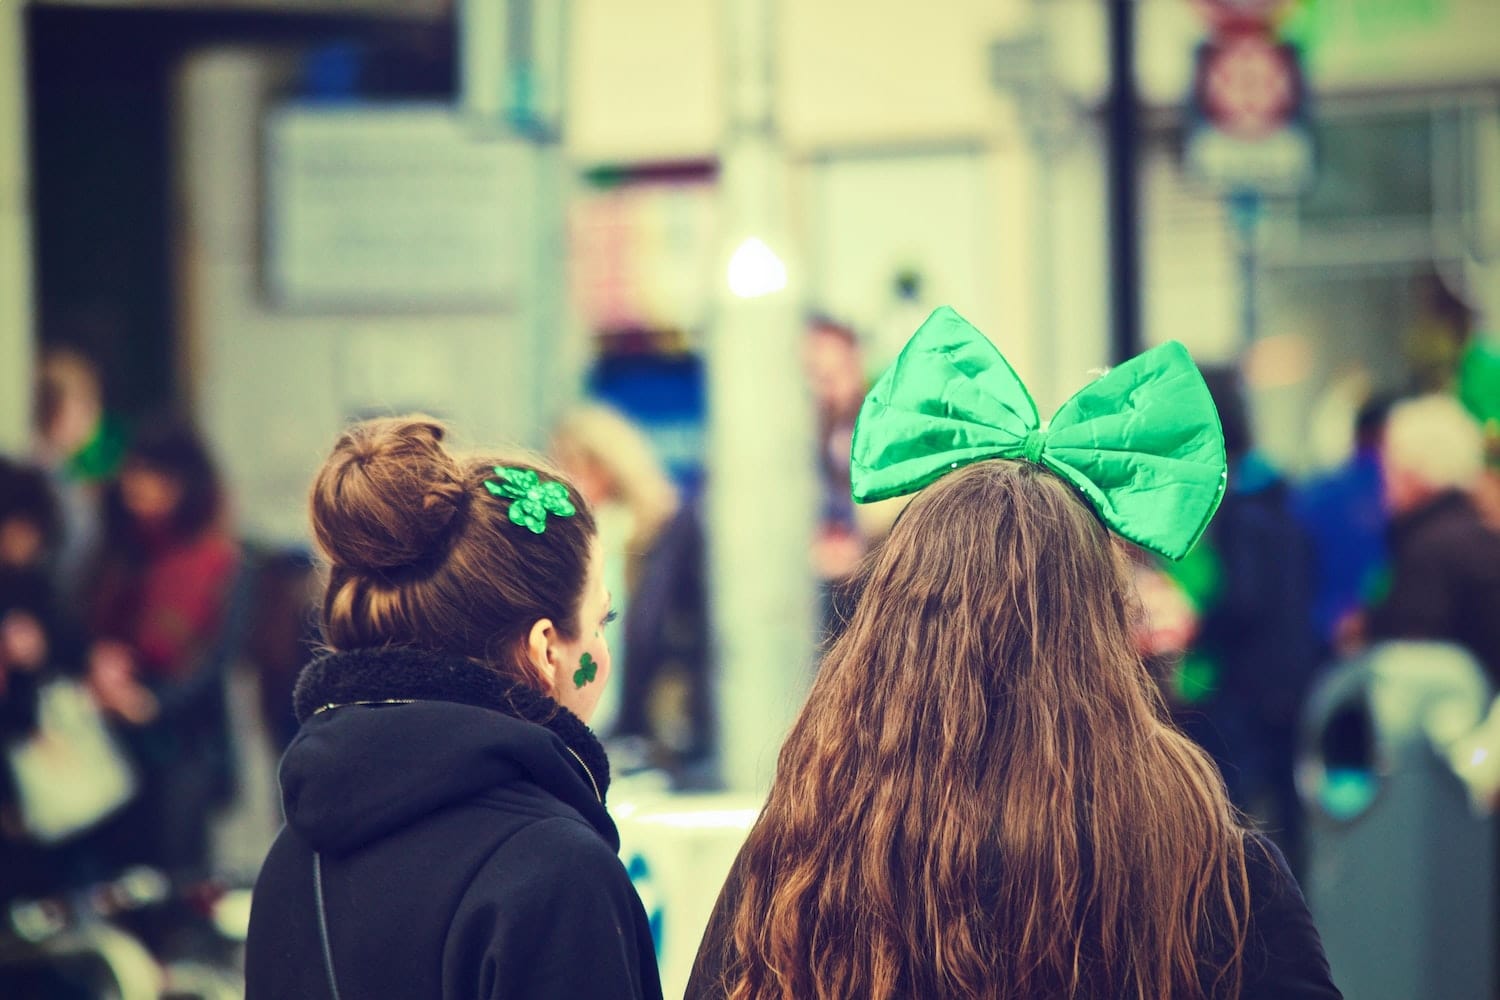 Girls wearing green bows in their hair for St Patrick's Day